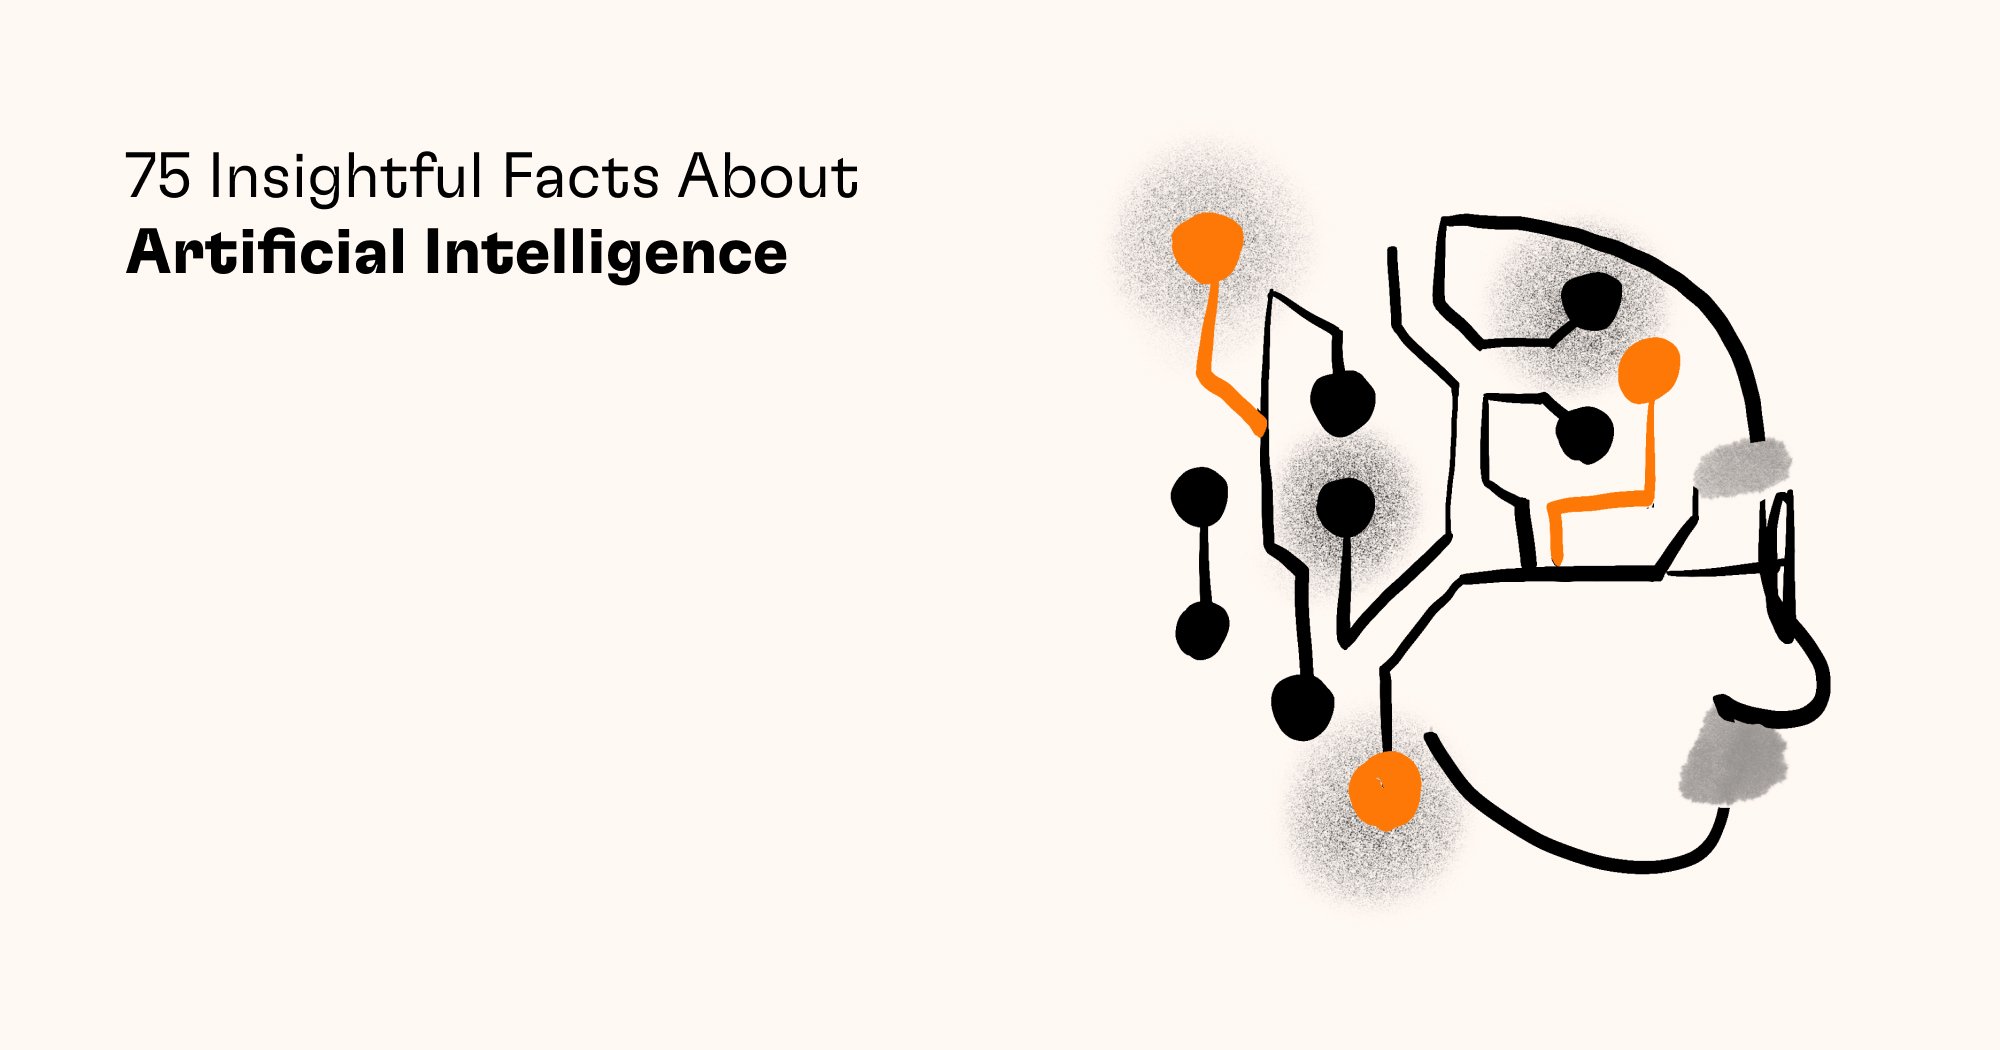 75 Insightful Facts About Artificial Intelligence